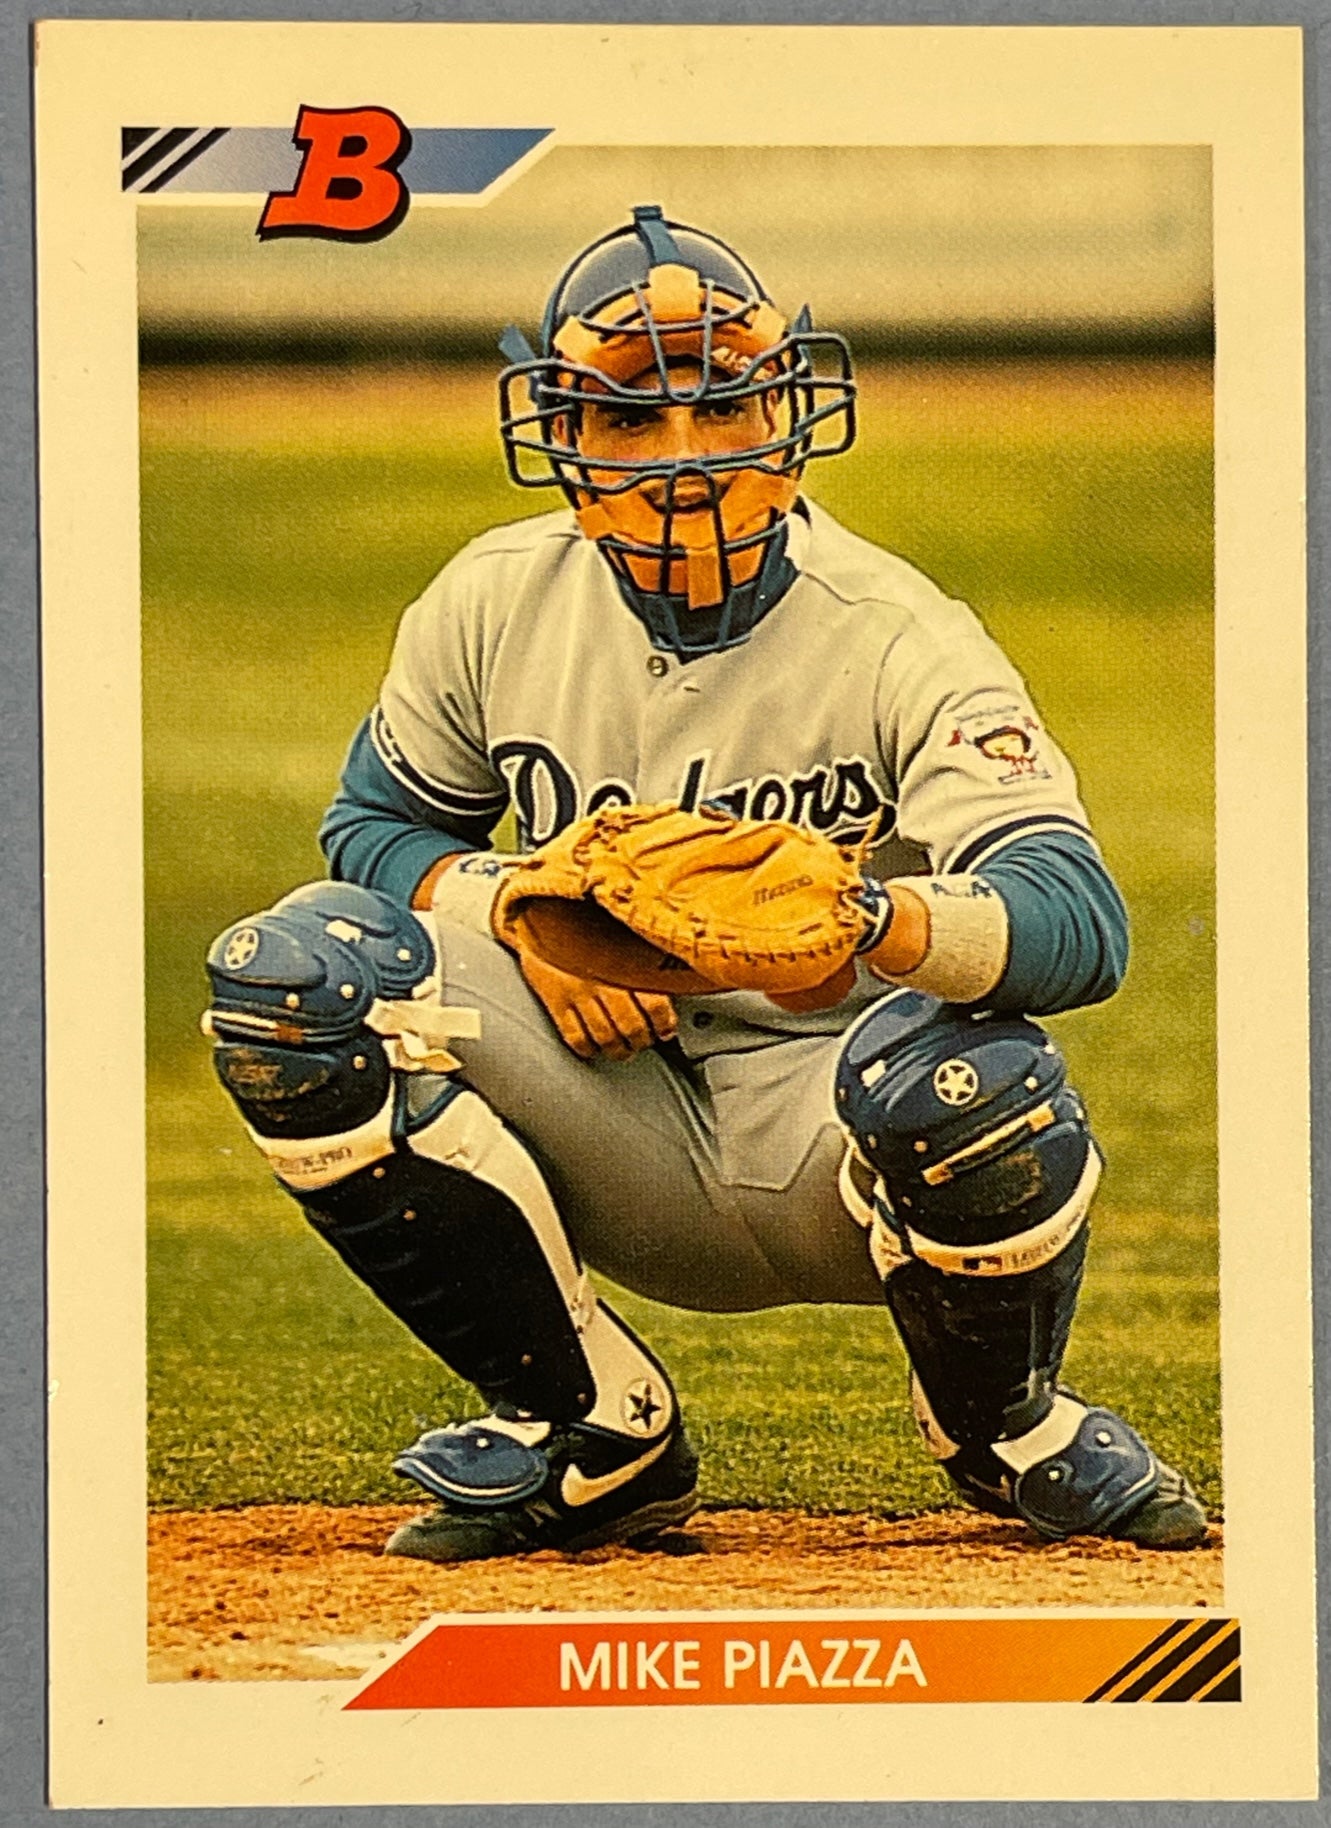 Mike Piazza baseball card (Los Angeles Dodgers New York